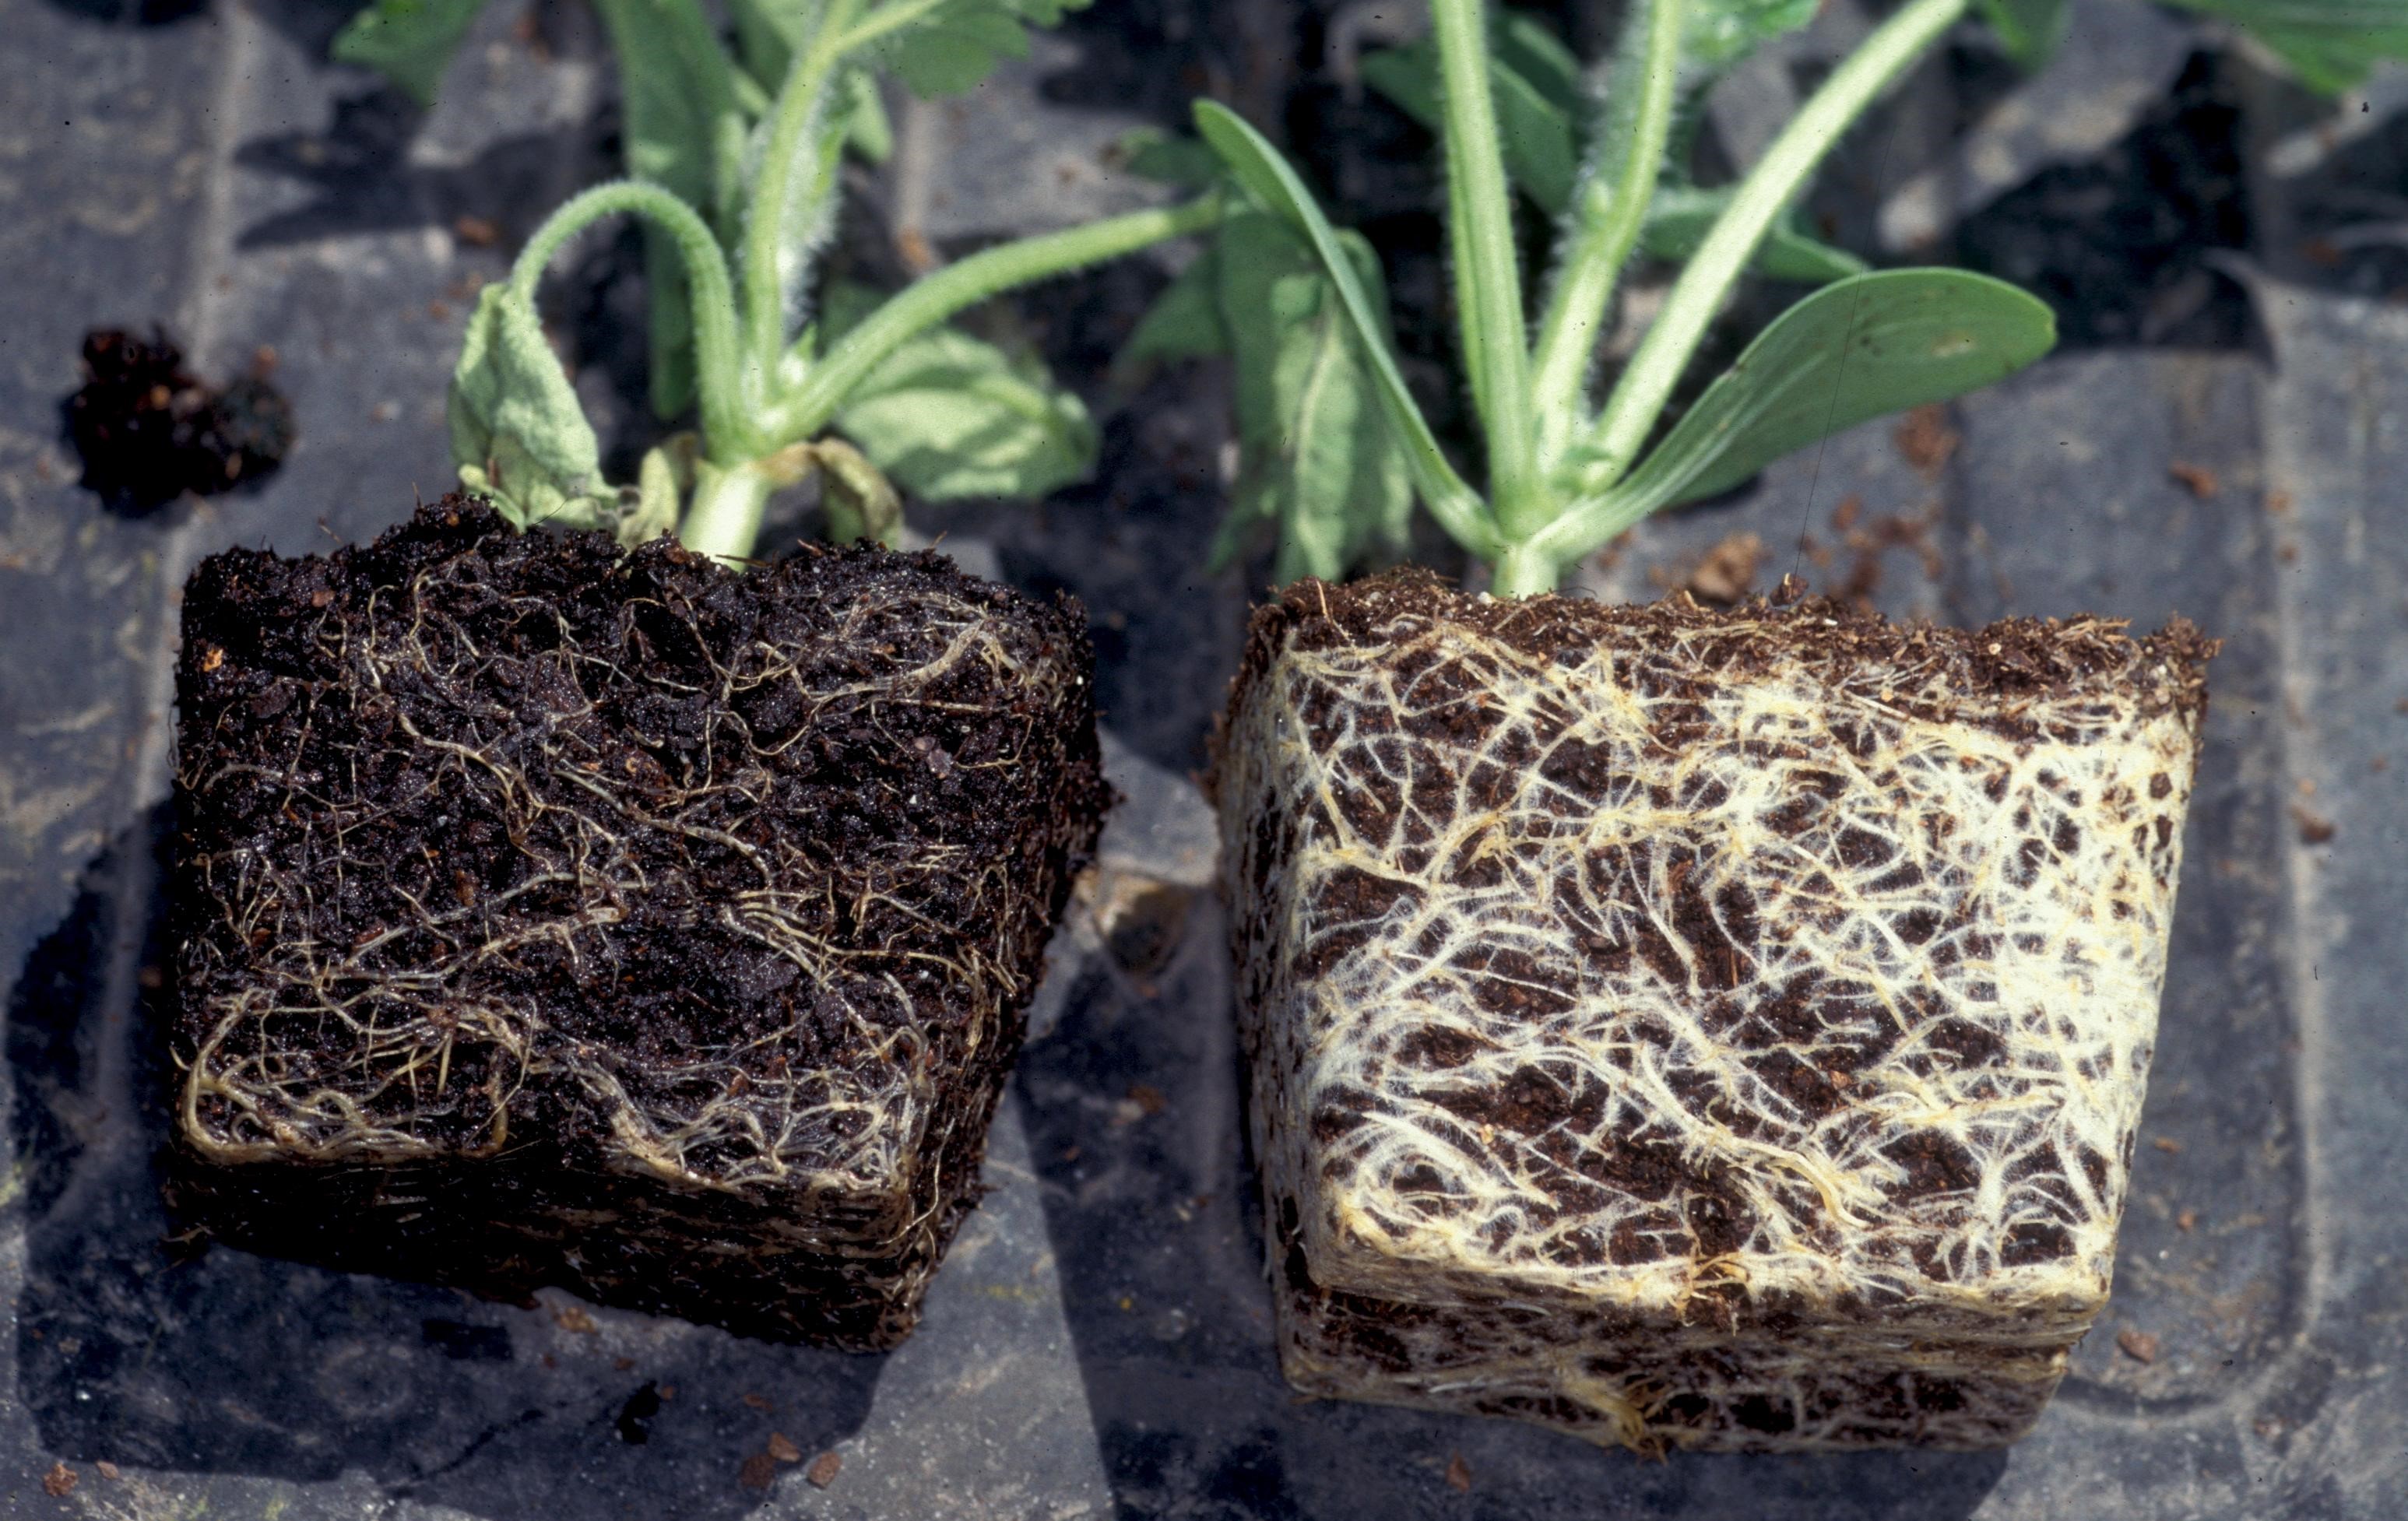 Pythium root rot (left) and healthy (right) watermelon transplant roots.